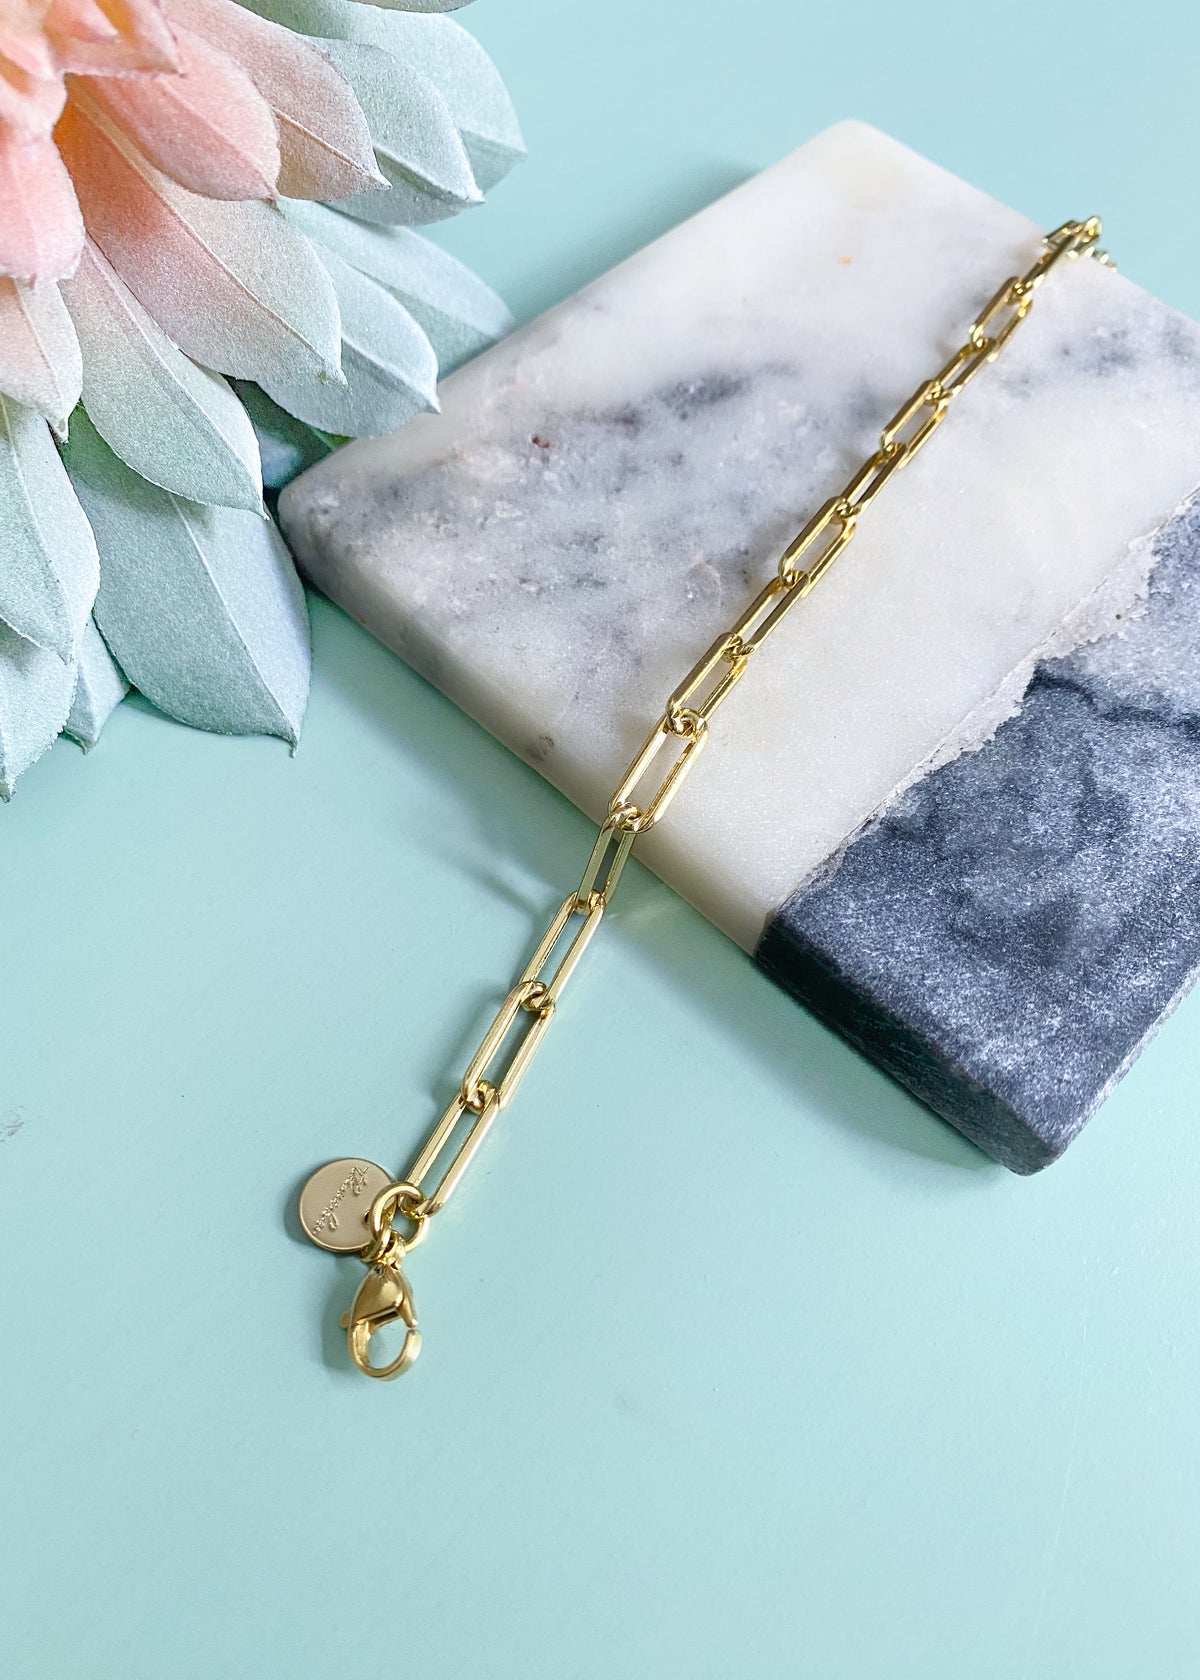 'Leo' Dainty Paperclip Bracelet- Gold-Paperclip style bracelet. An everyday staple bracelet that pairs well with your stacks or can be worn alone.-Cali Moon Boutique, Plainville Connecticut